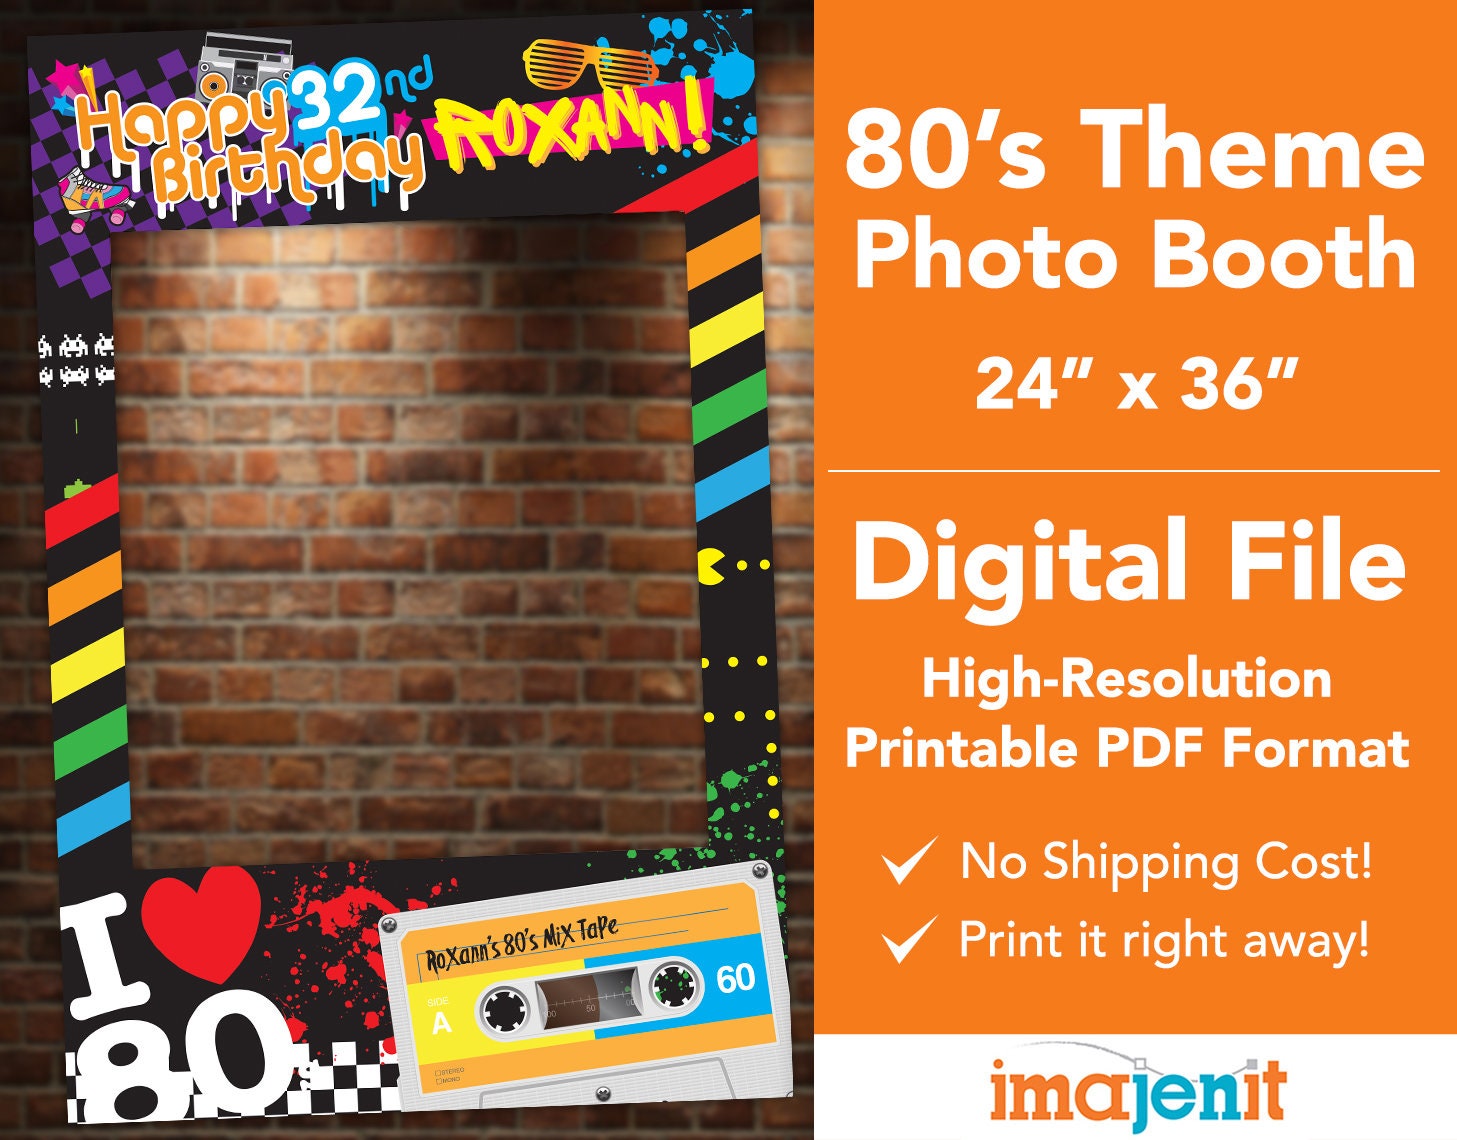 80s Theme Photo Booth Party Prop Frame Digital File